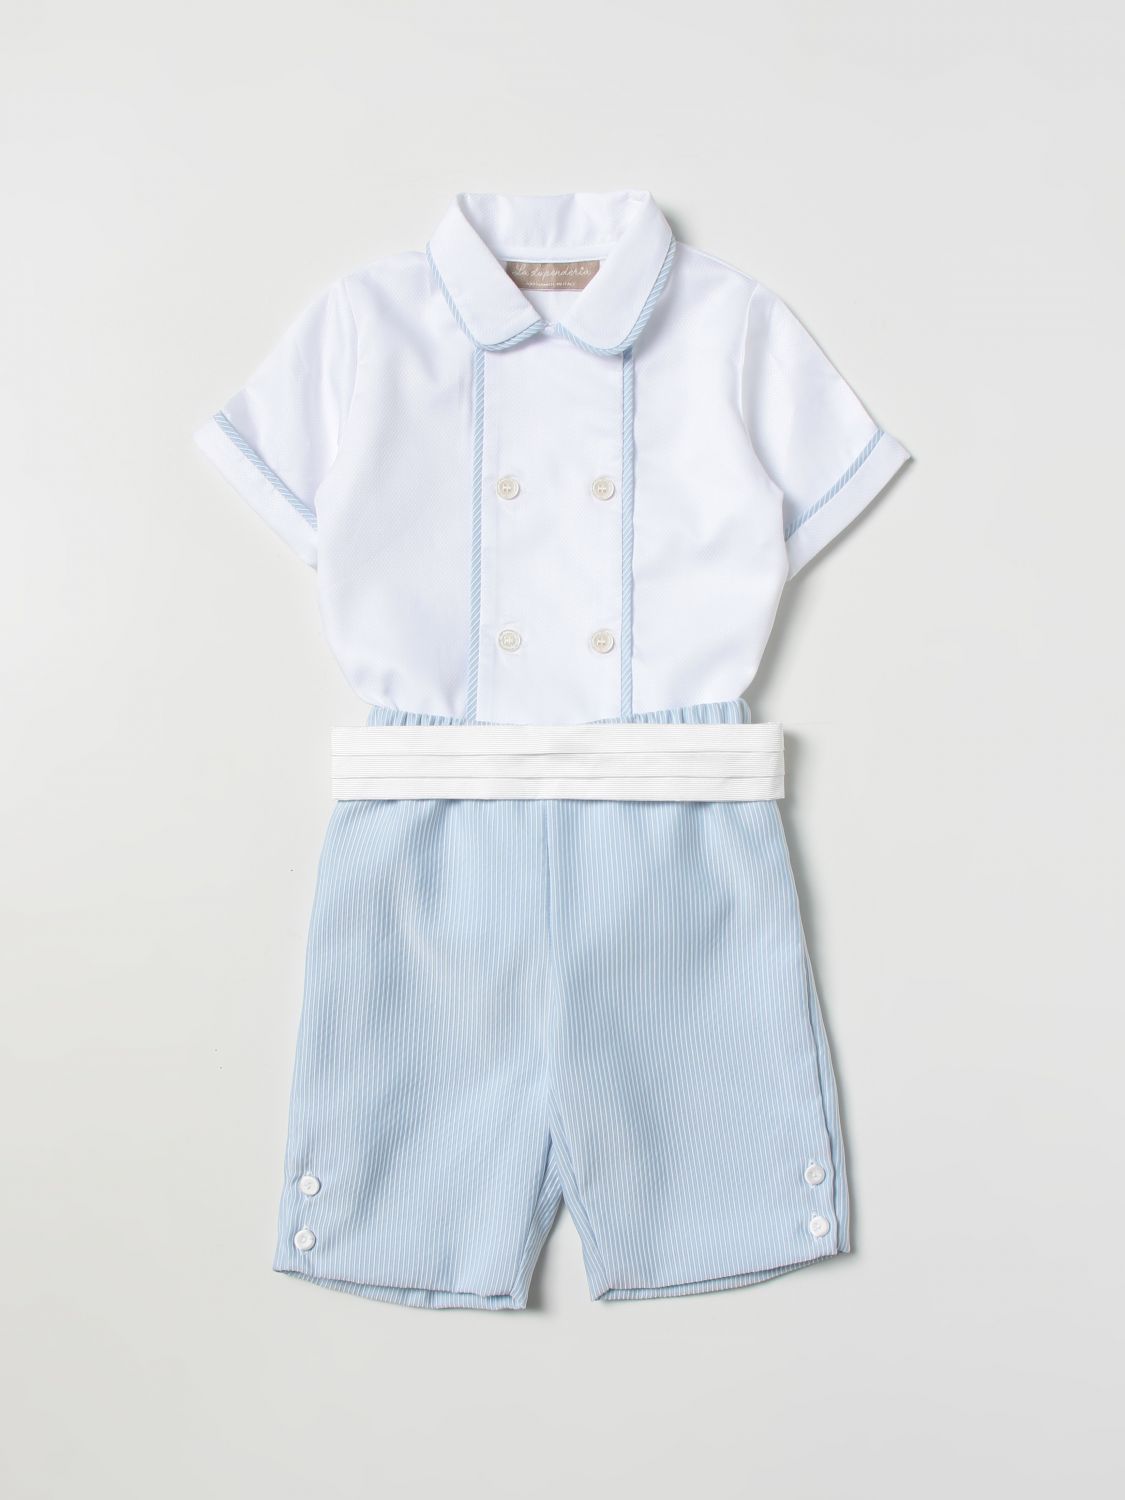 La Stupenderia Babies' Overall  Kinder Farbe Weiss In White